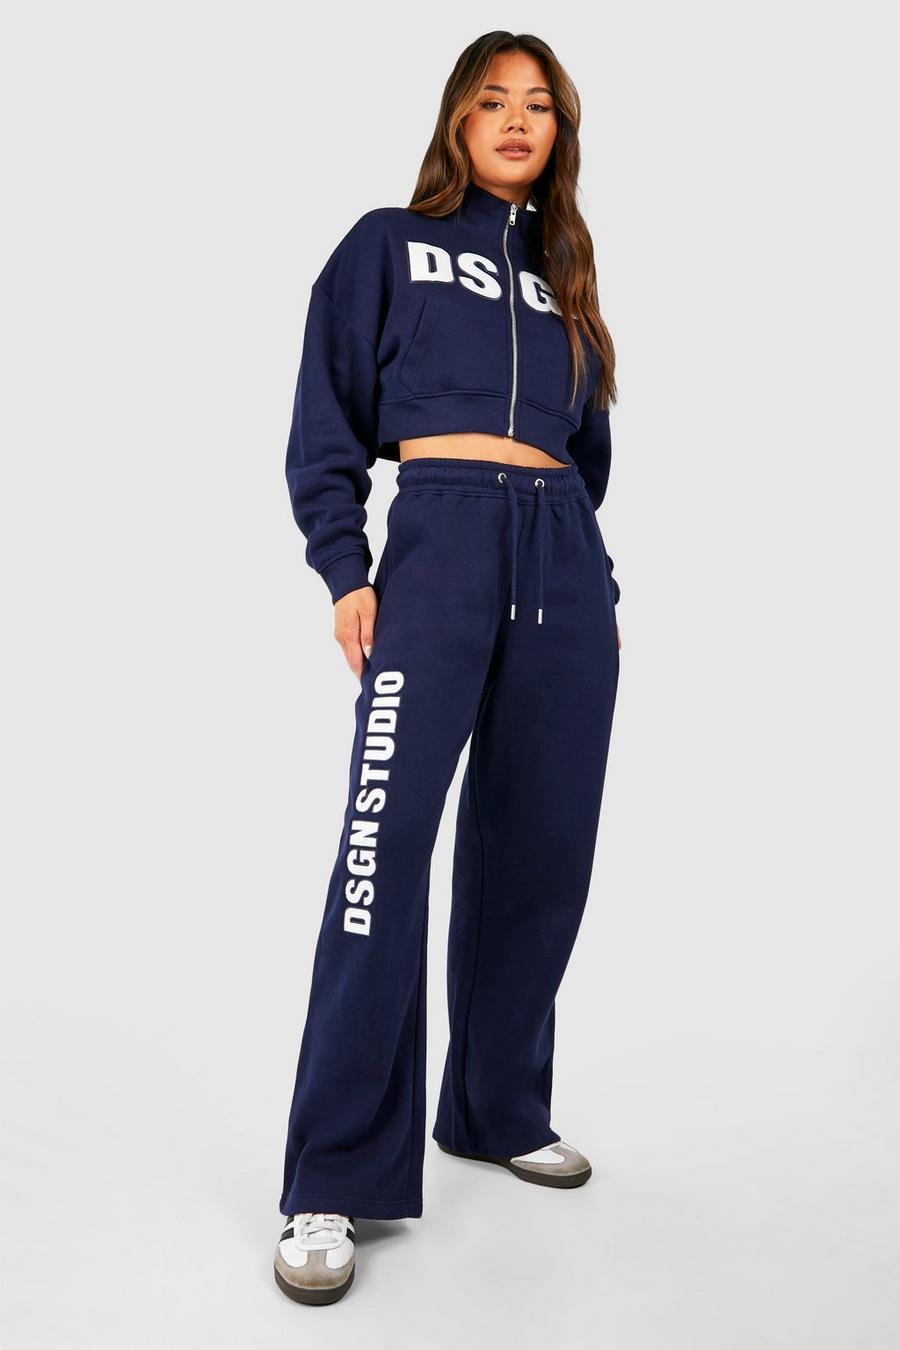 Navy Dsgn Studio Embroidered Cropped Sweatshirt Tracksuit image number 1